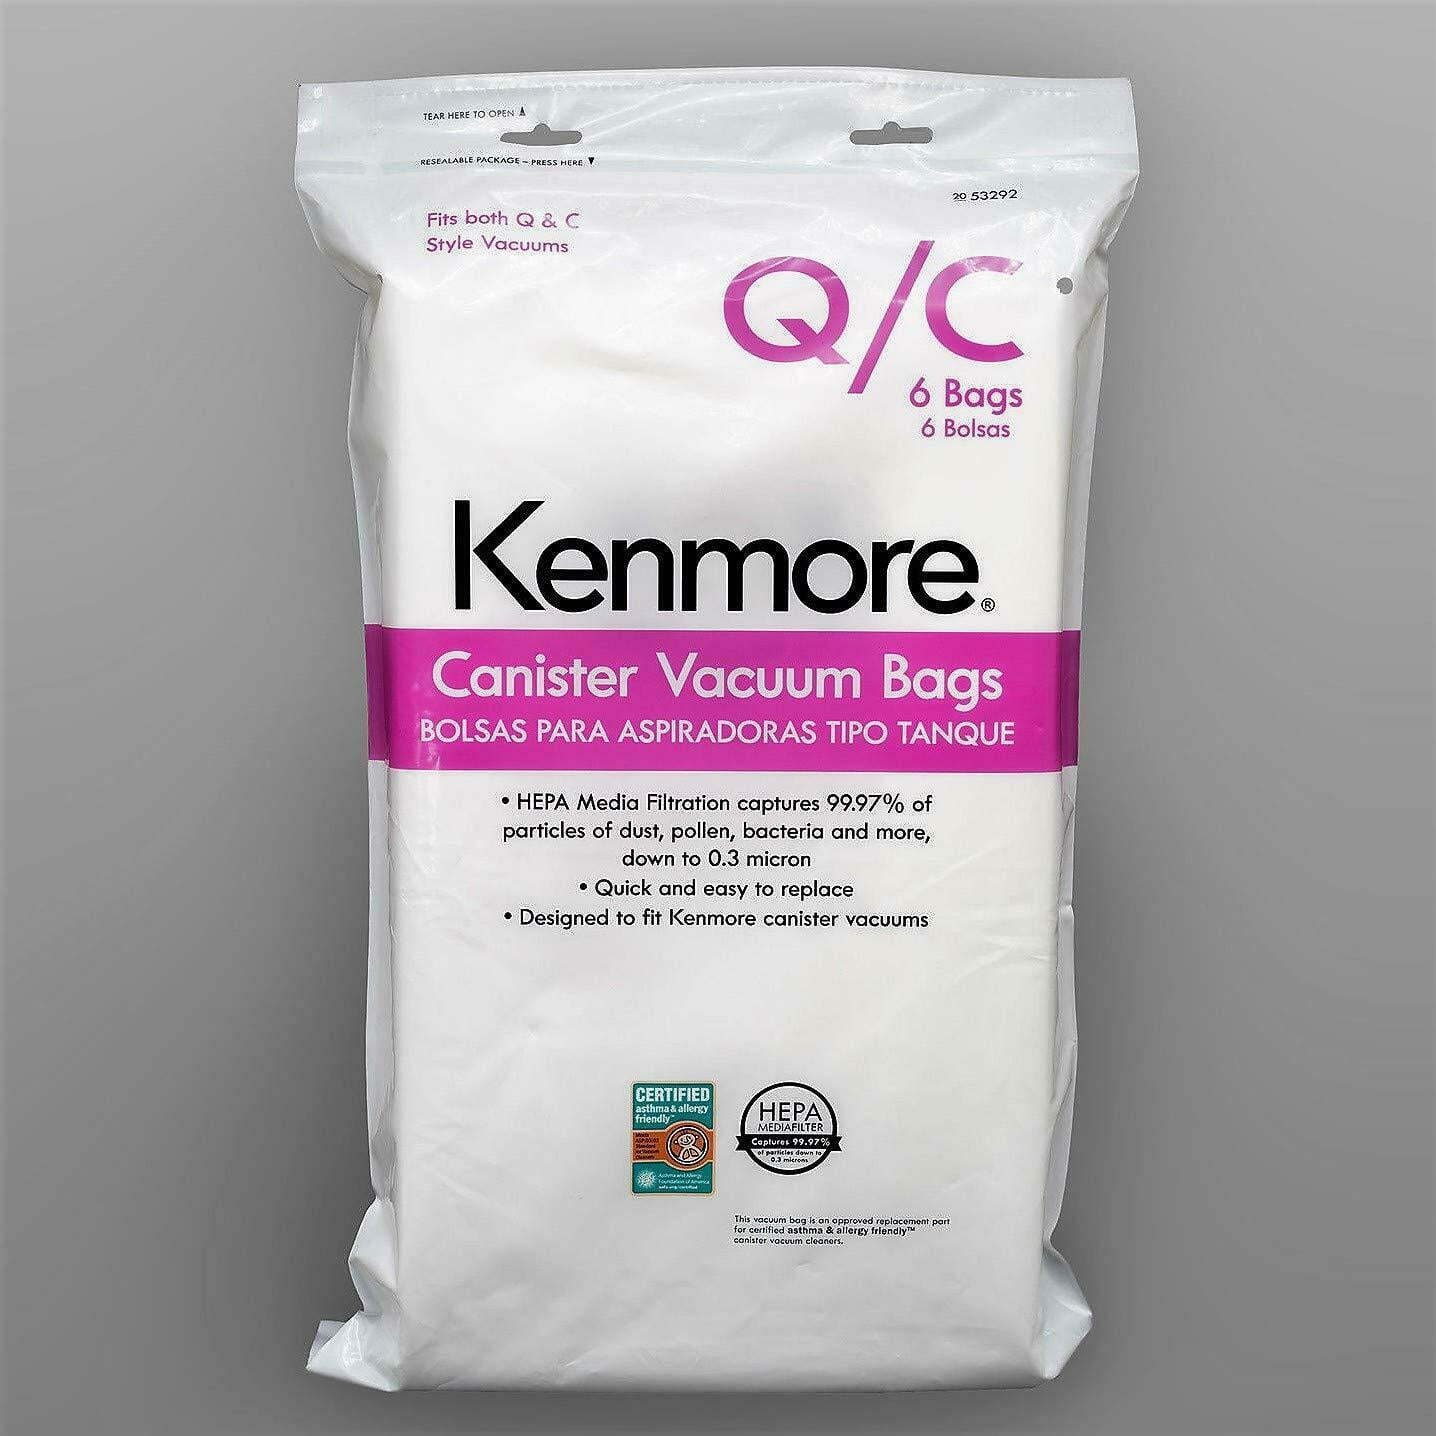 2 12 6 Pack Kenmore Hepa #20 53292 Style Q/C Canister Vacuum Bags 